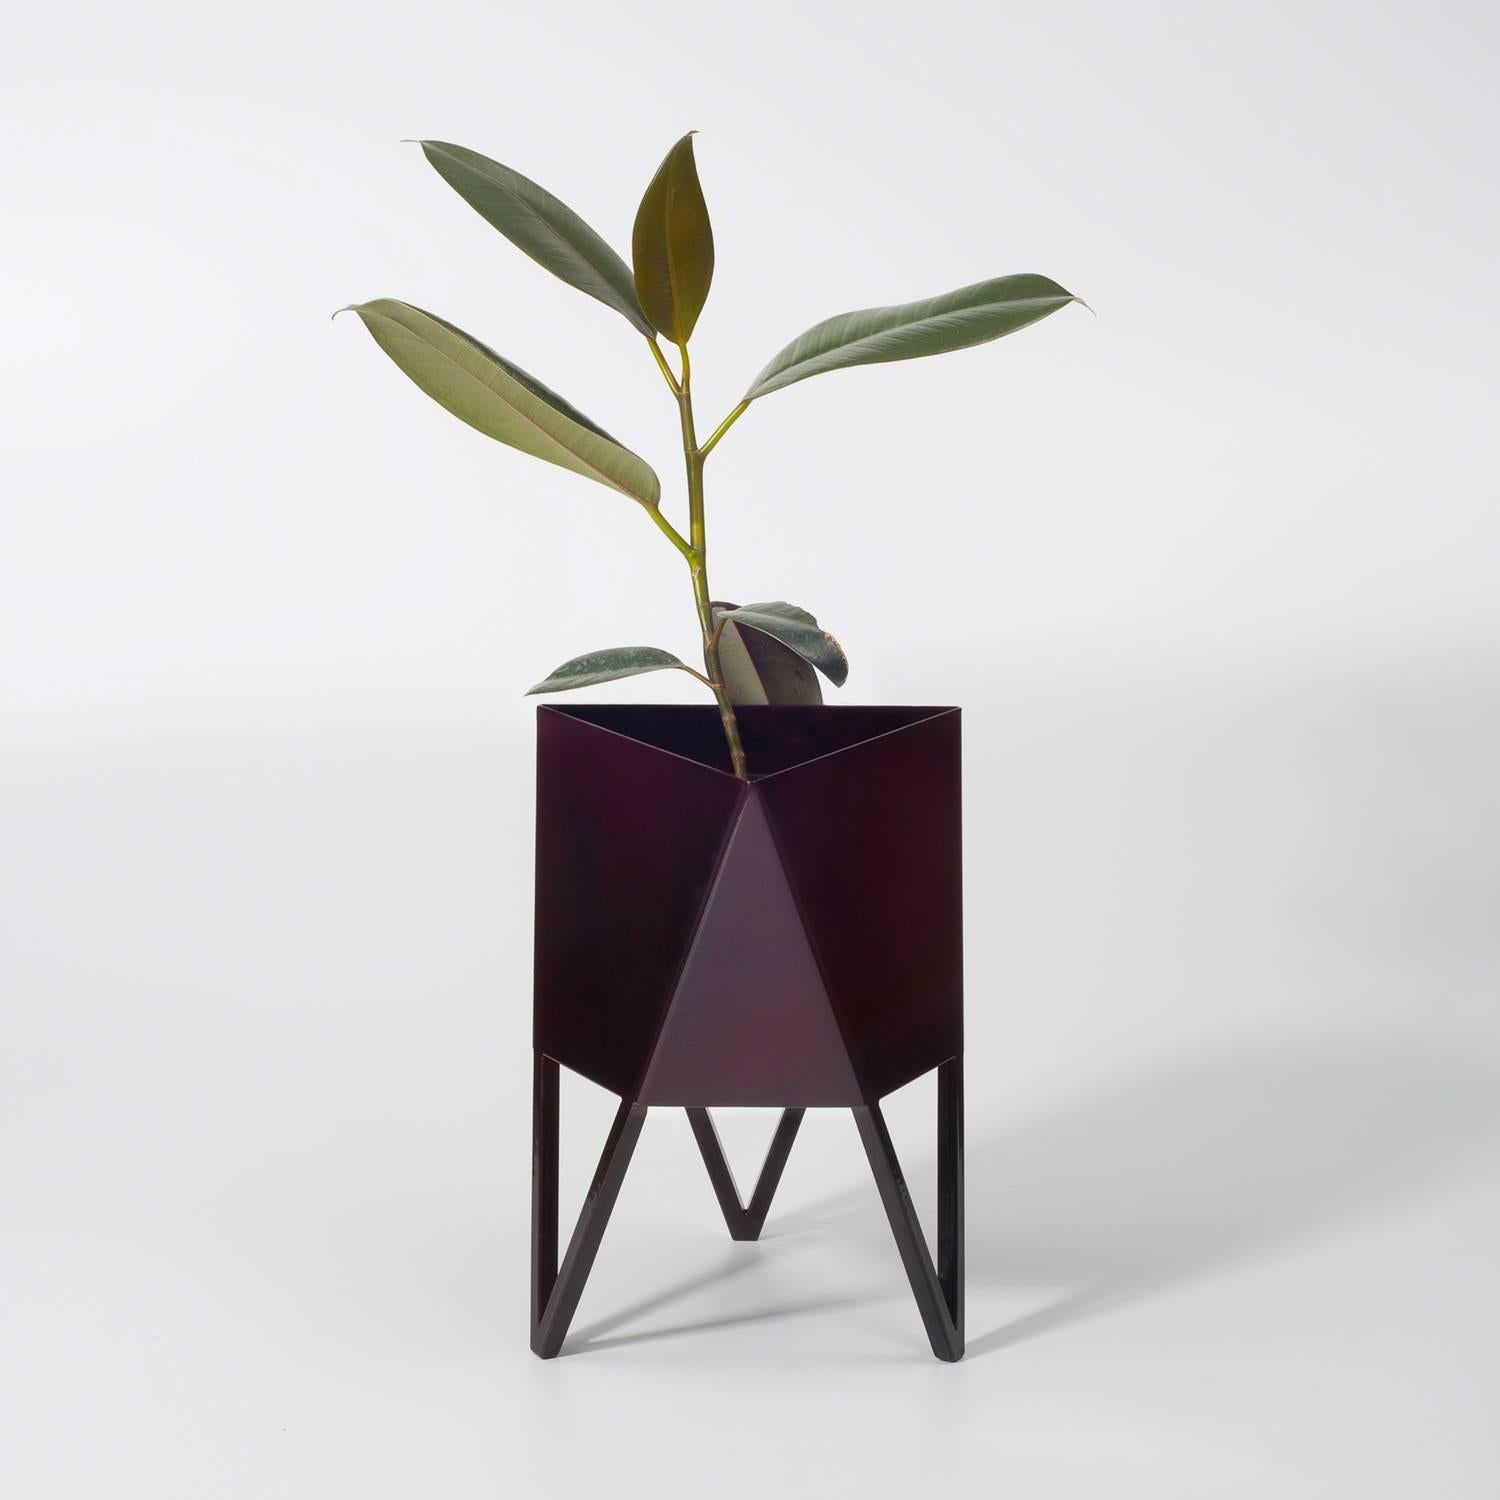 Deca Planter in Living Coral Steel, Medium, by Force/Collide 1